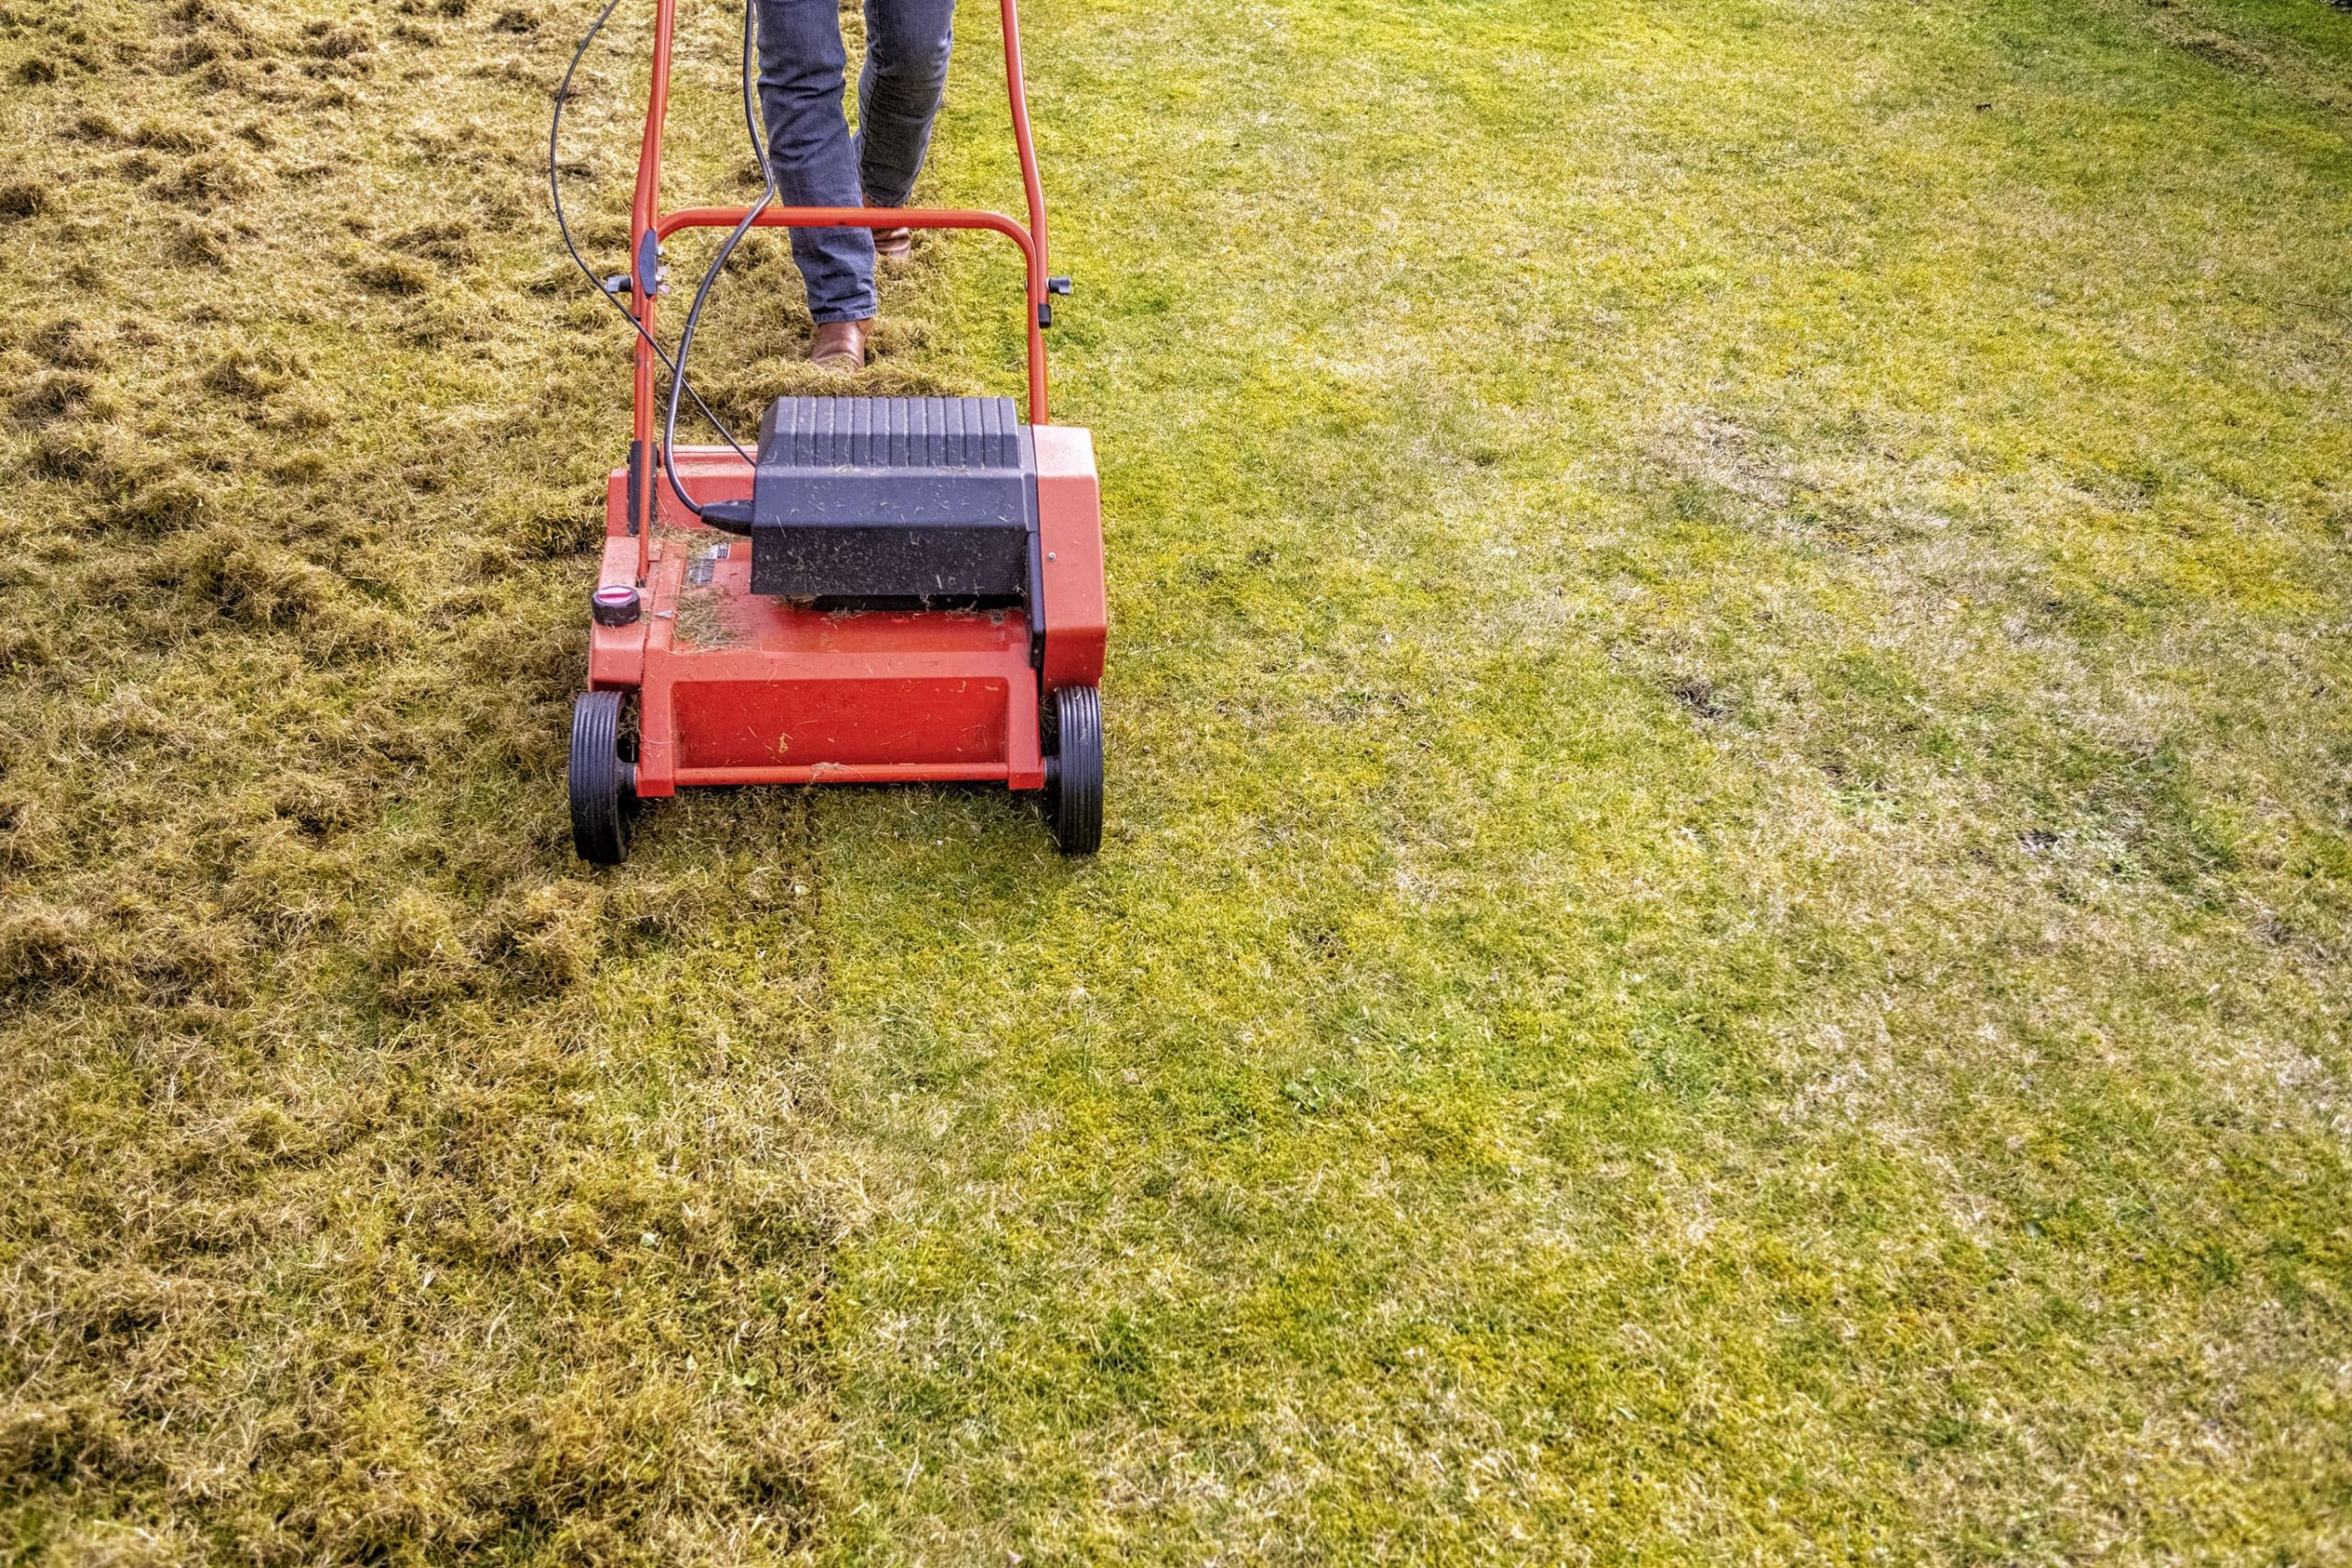 Effect of scarifying on the look of a lawn.